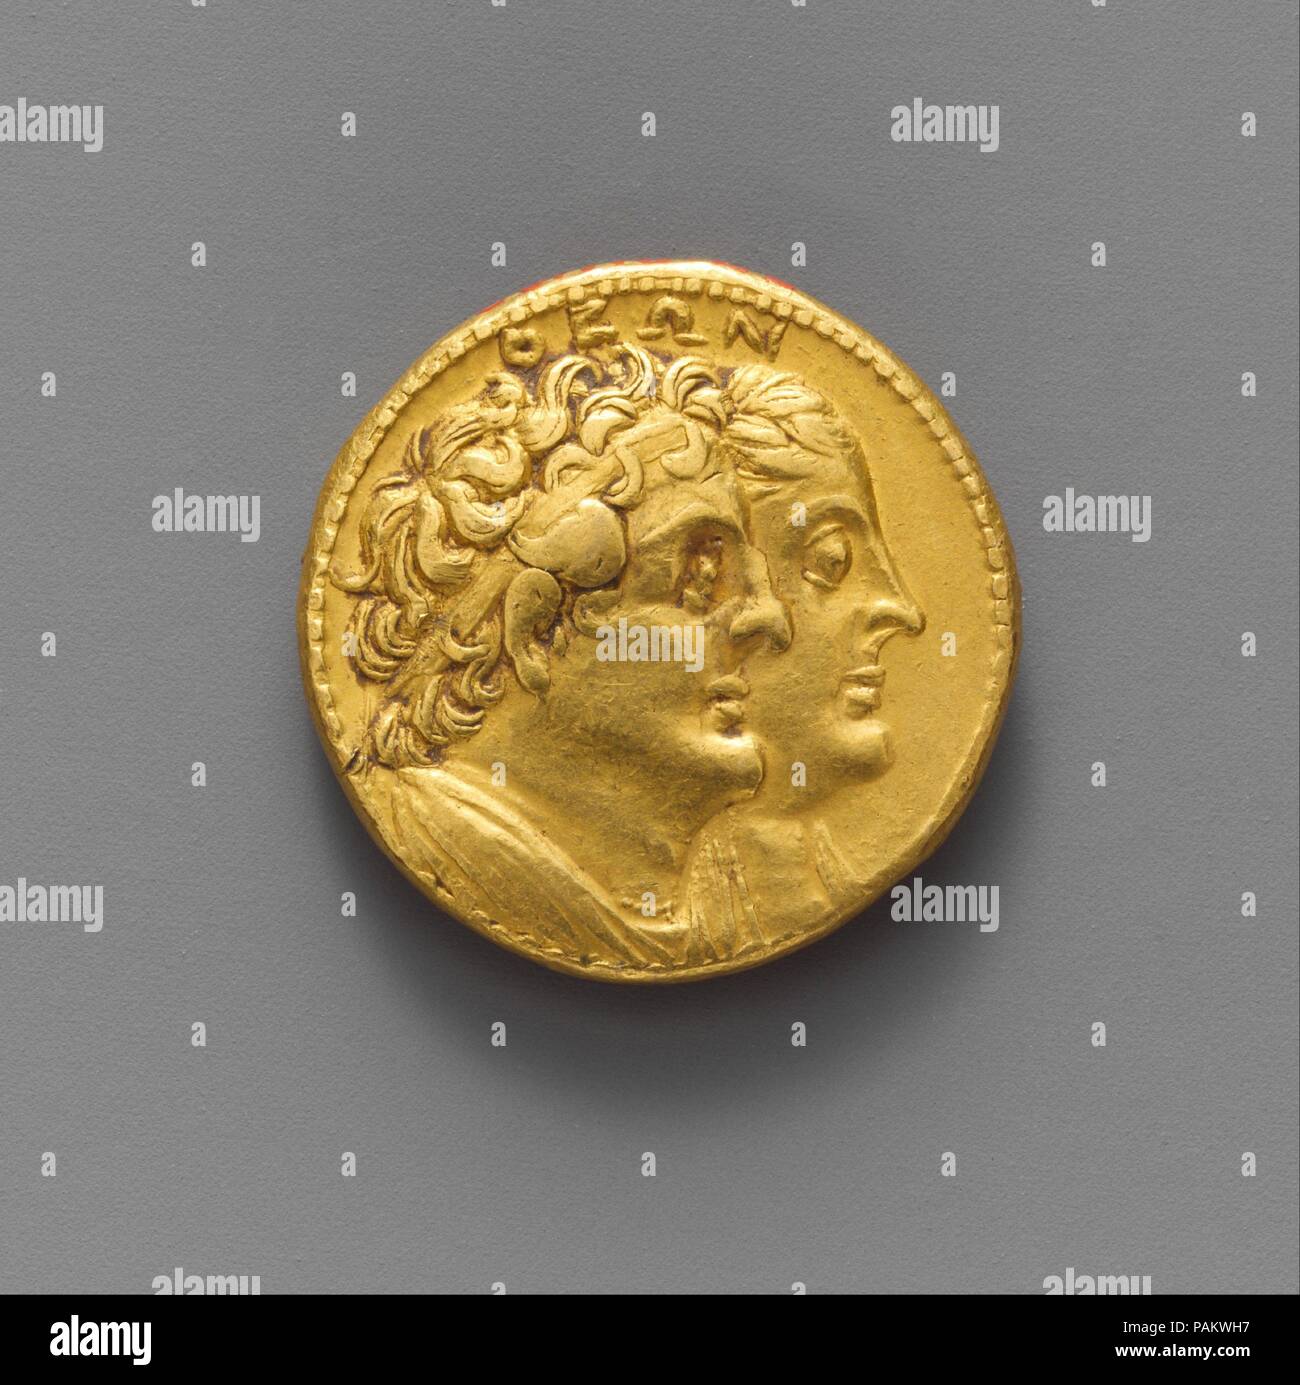 Gold oktadrachm of Ptolemy III Euergetes. Culture: Greek, Ptolemaic. Dimensions: 1 in., 0.979oz. (2.5 cm, 27.77g). Date: ca. 246-221 B.C..  conjoined busts of Ptolemy II and Arsinoe II/conjoined busts of Ptolemy I and Berenike I  Alexandria. Museum: Metropolitan Museum of Art, New York, USA. Stock Photo